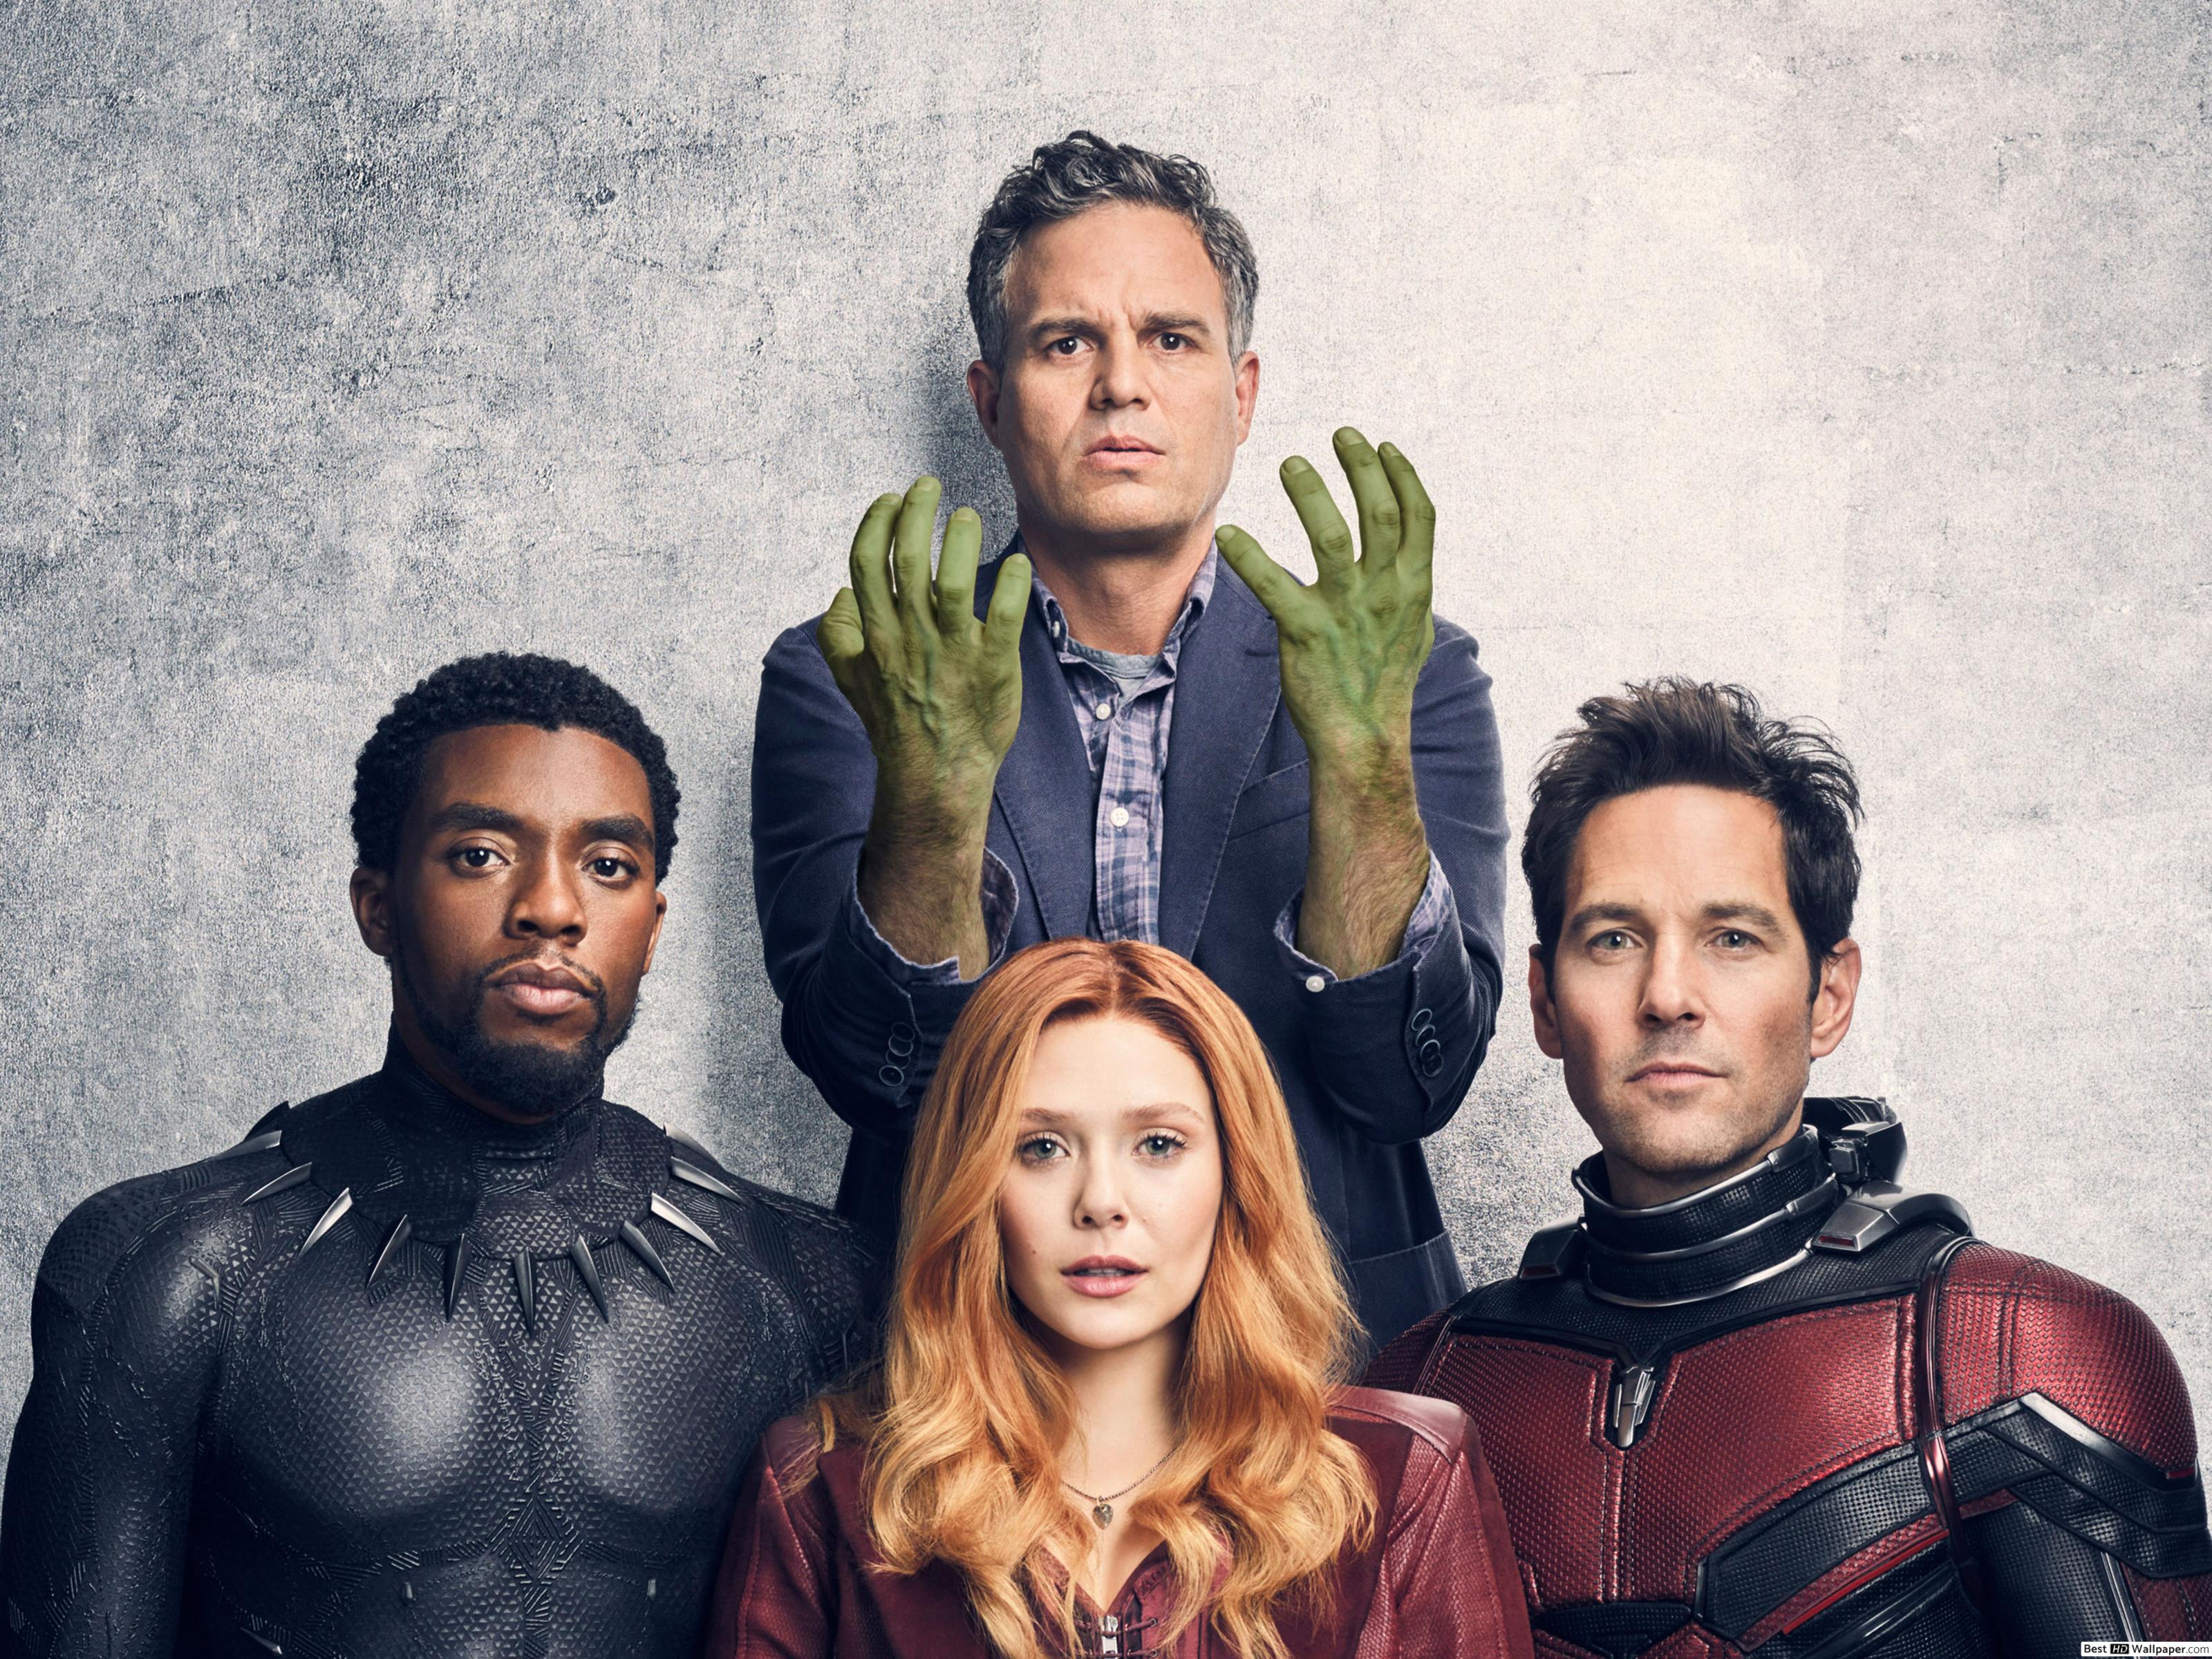 Avengers, Scarlet Witch, Black Panther and Scott Lang